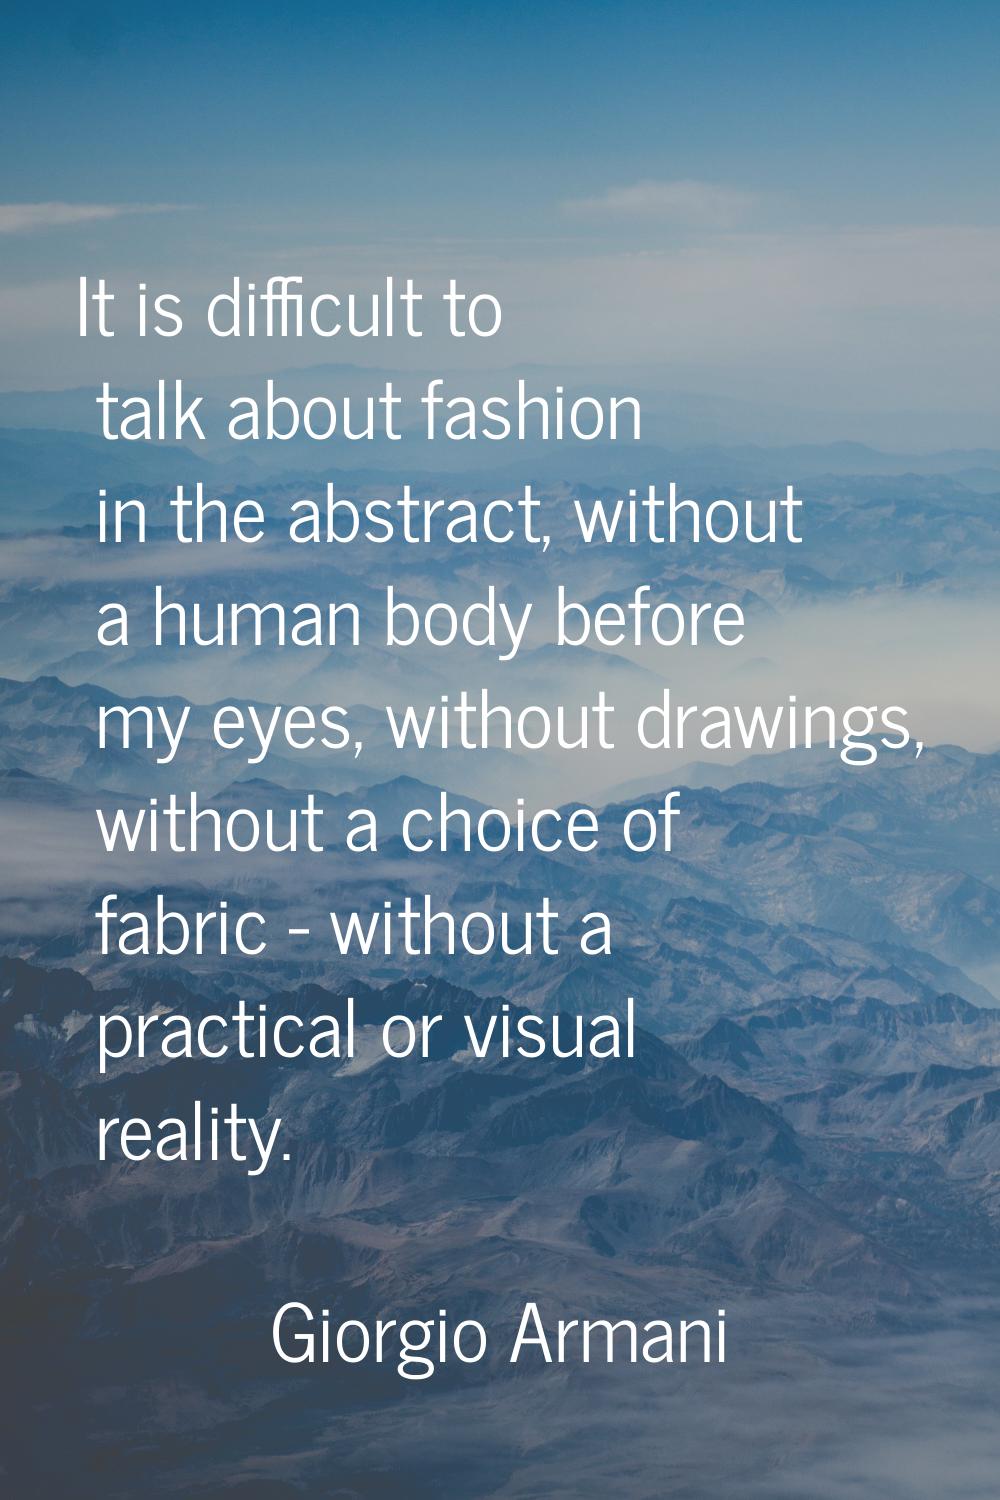 It is difficult to talk about fashion in the abstract, without a human body before my eyes, without